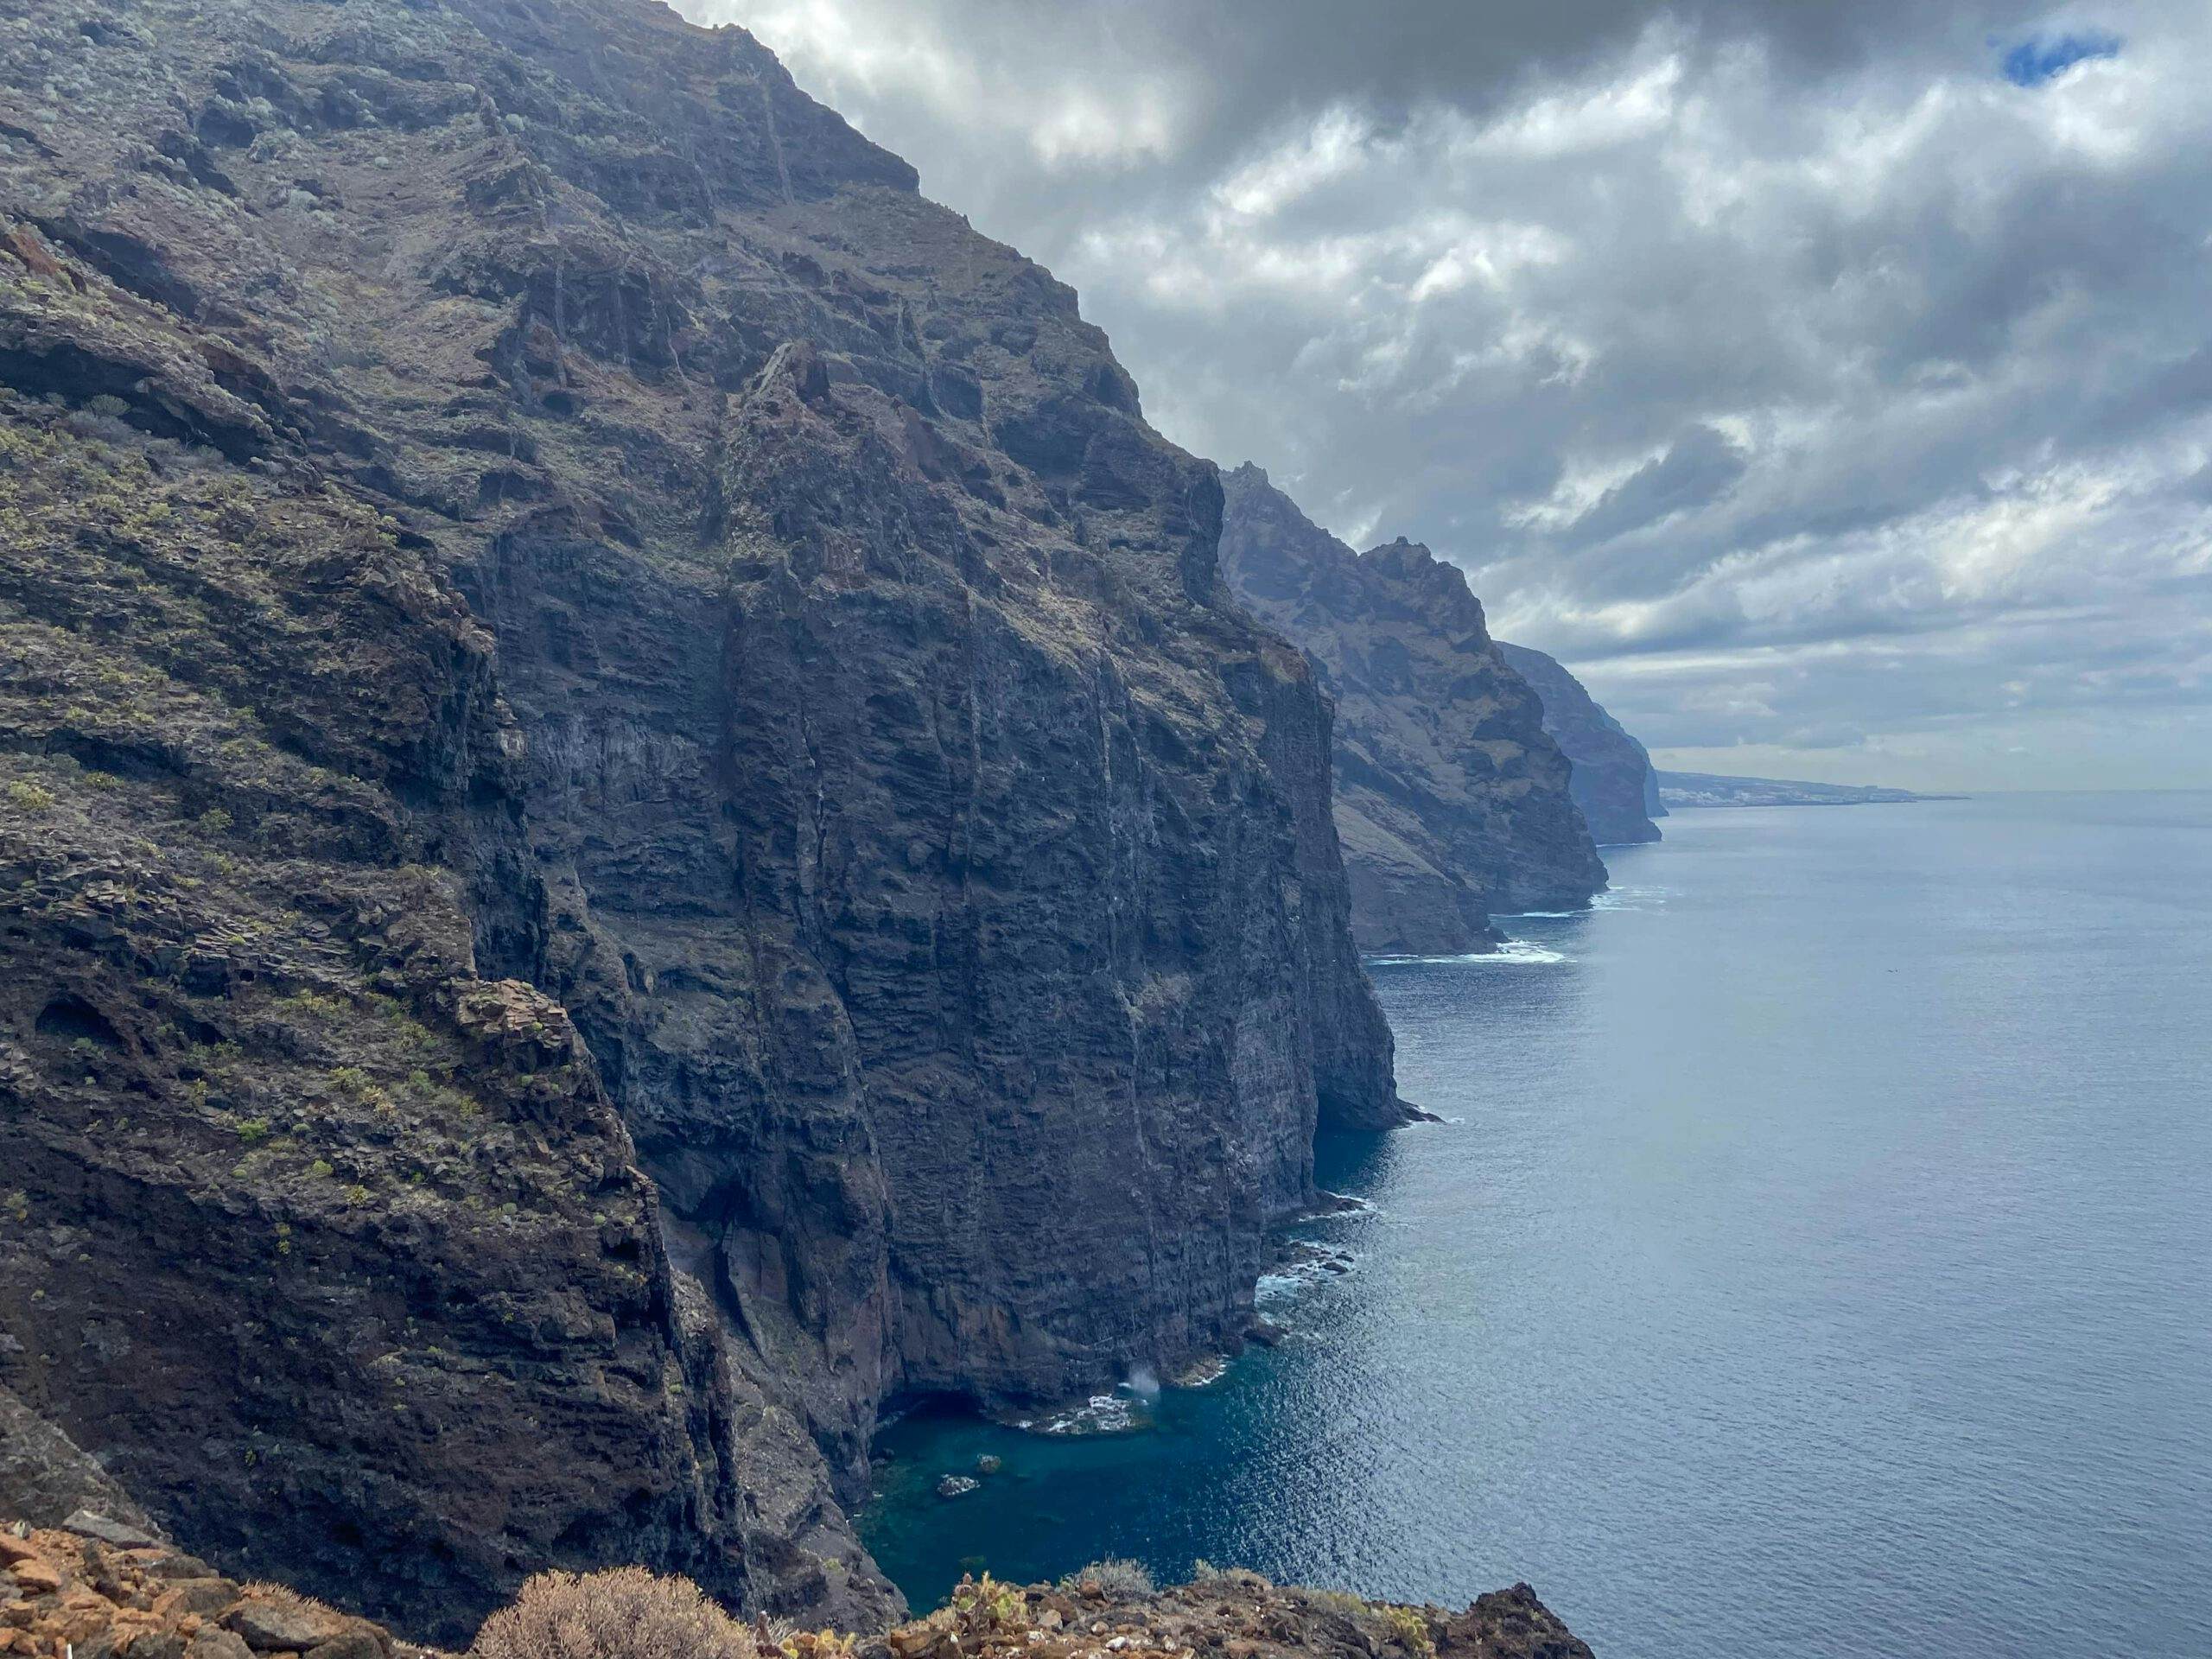 View of the cliffs and Los Gigantes in the background from the path on the cliff edge